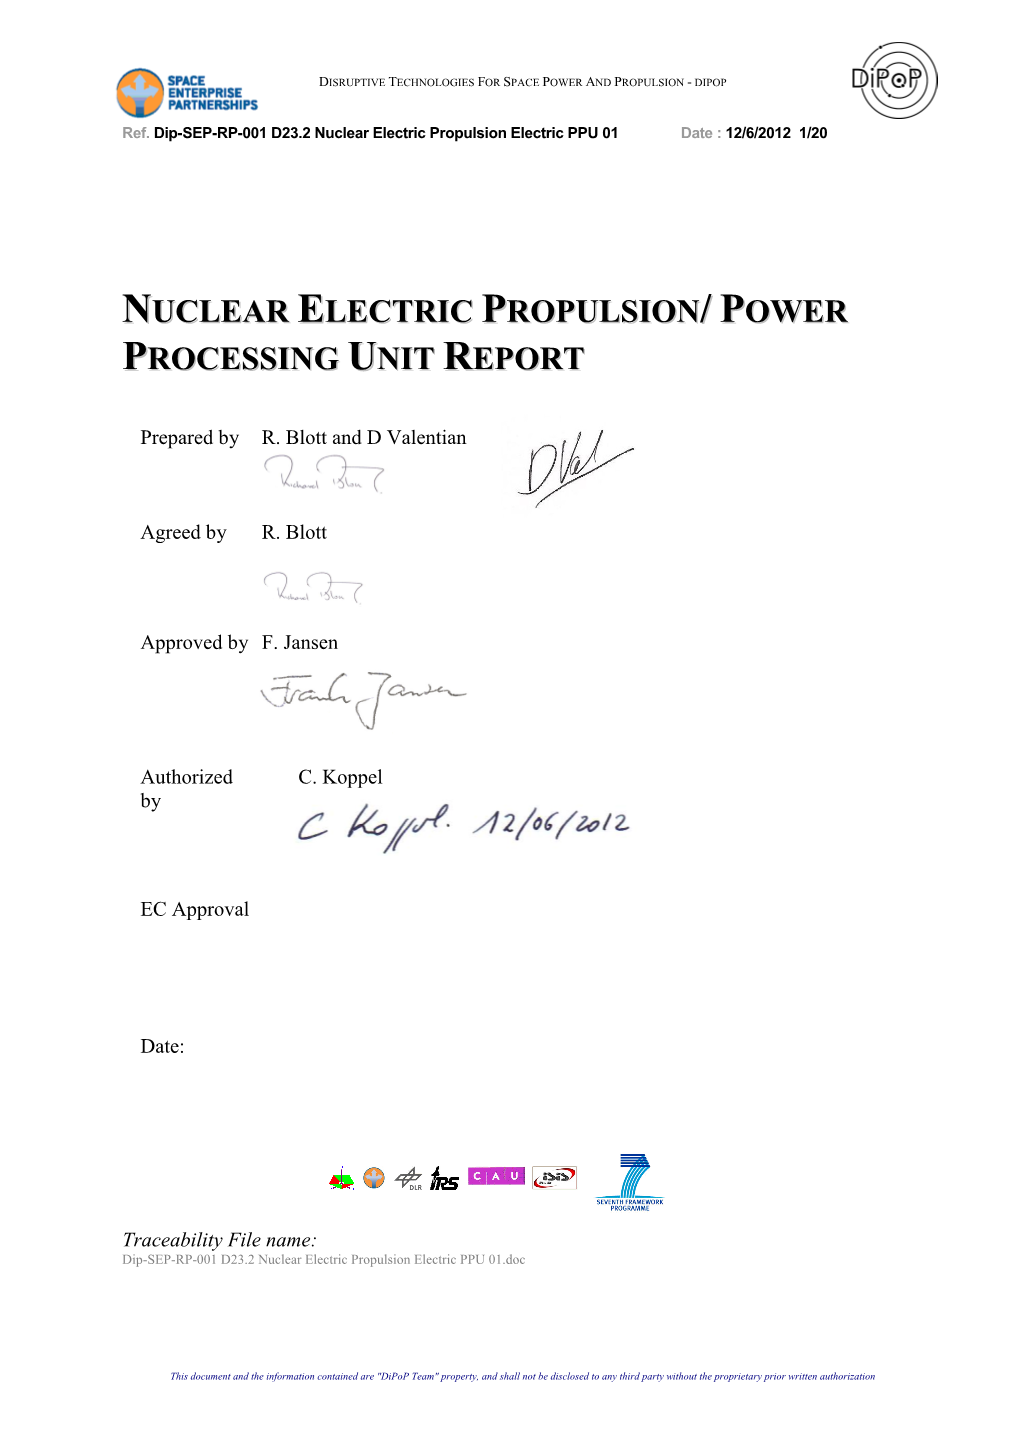 Nuclear Electric Propulsion / Power Processing